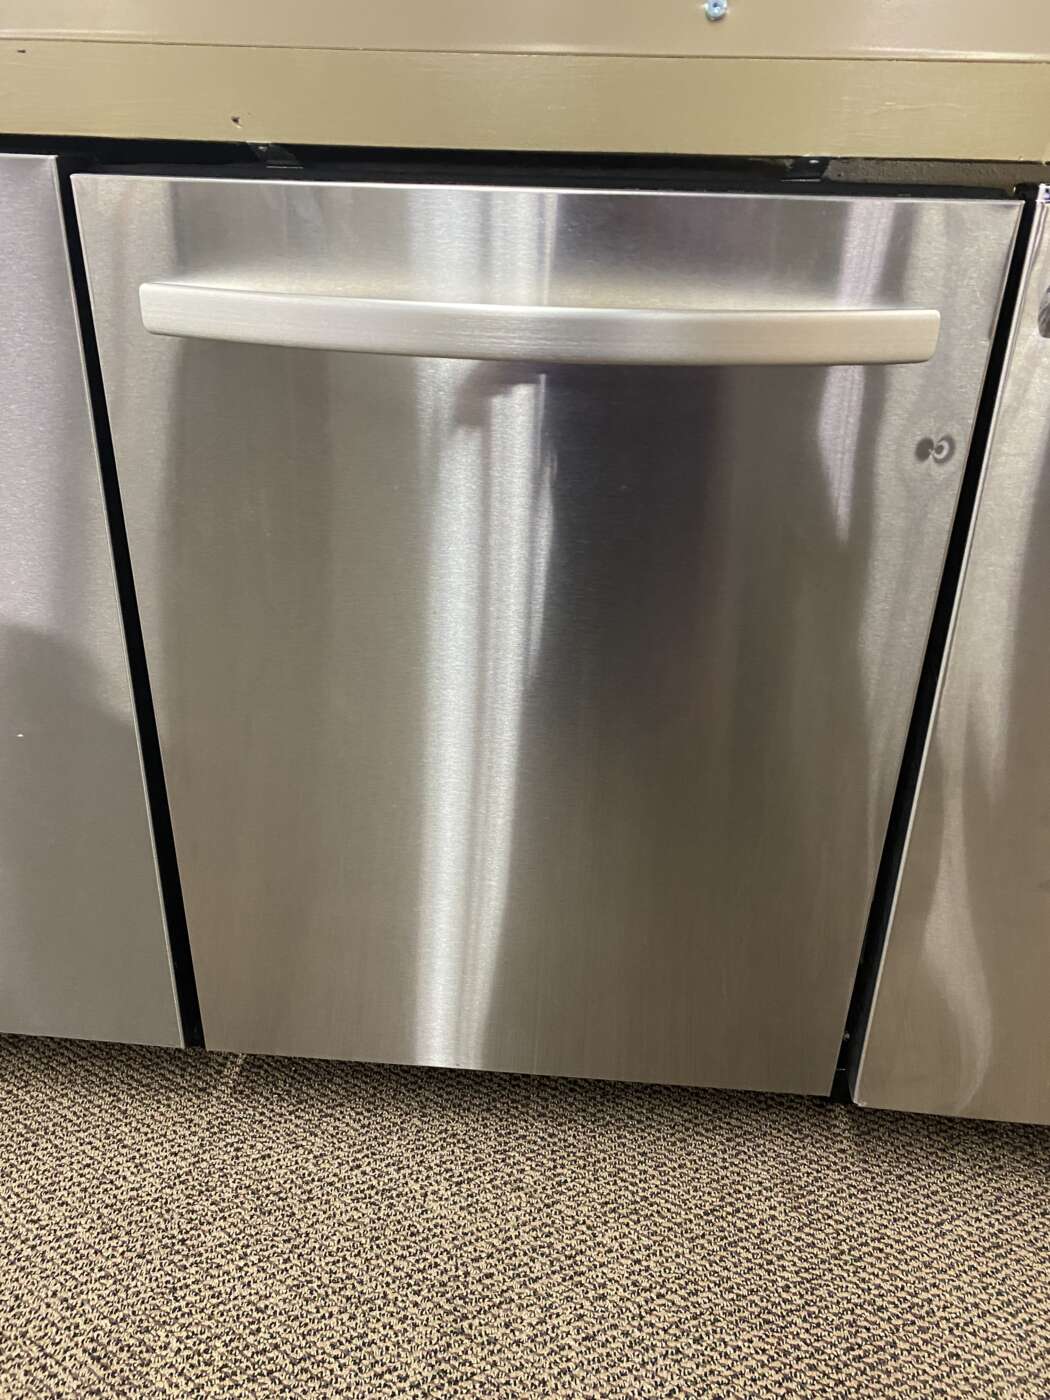 Reconditioned KENMORE Dishwasher With Stainless Steel Tub